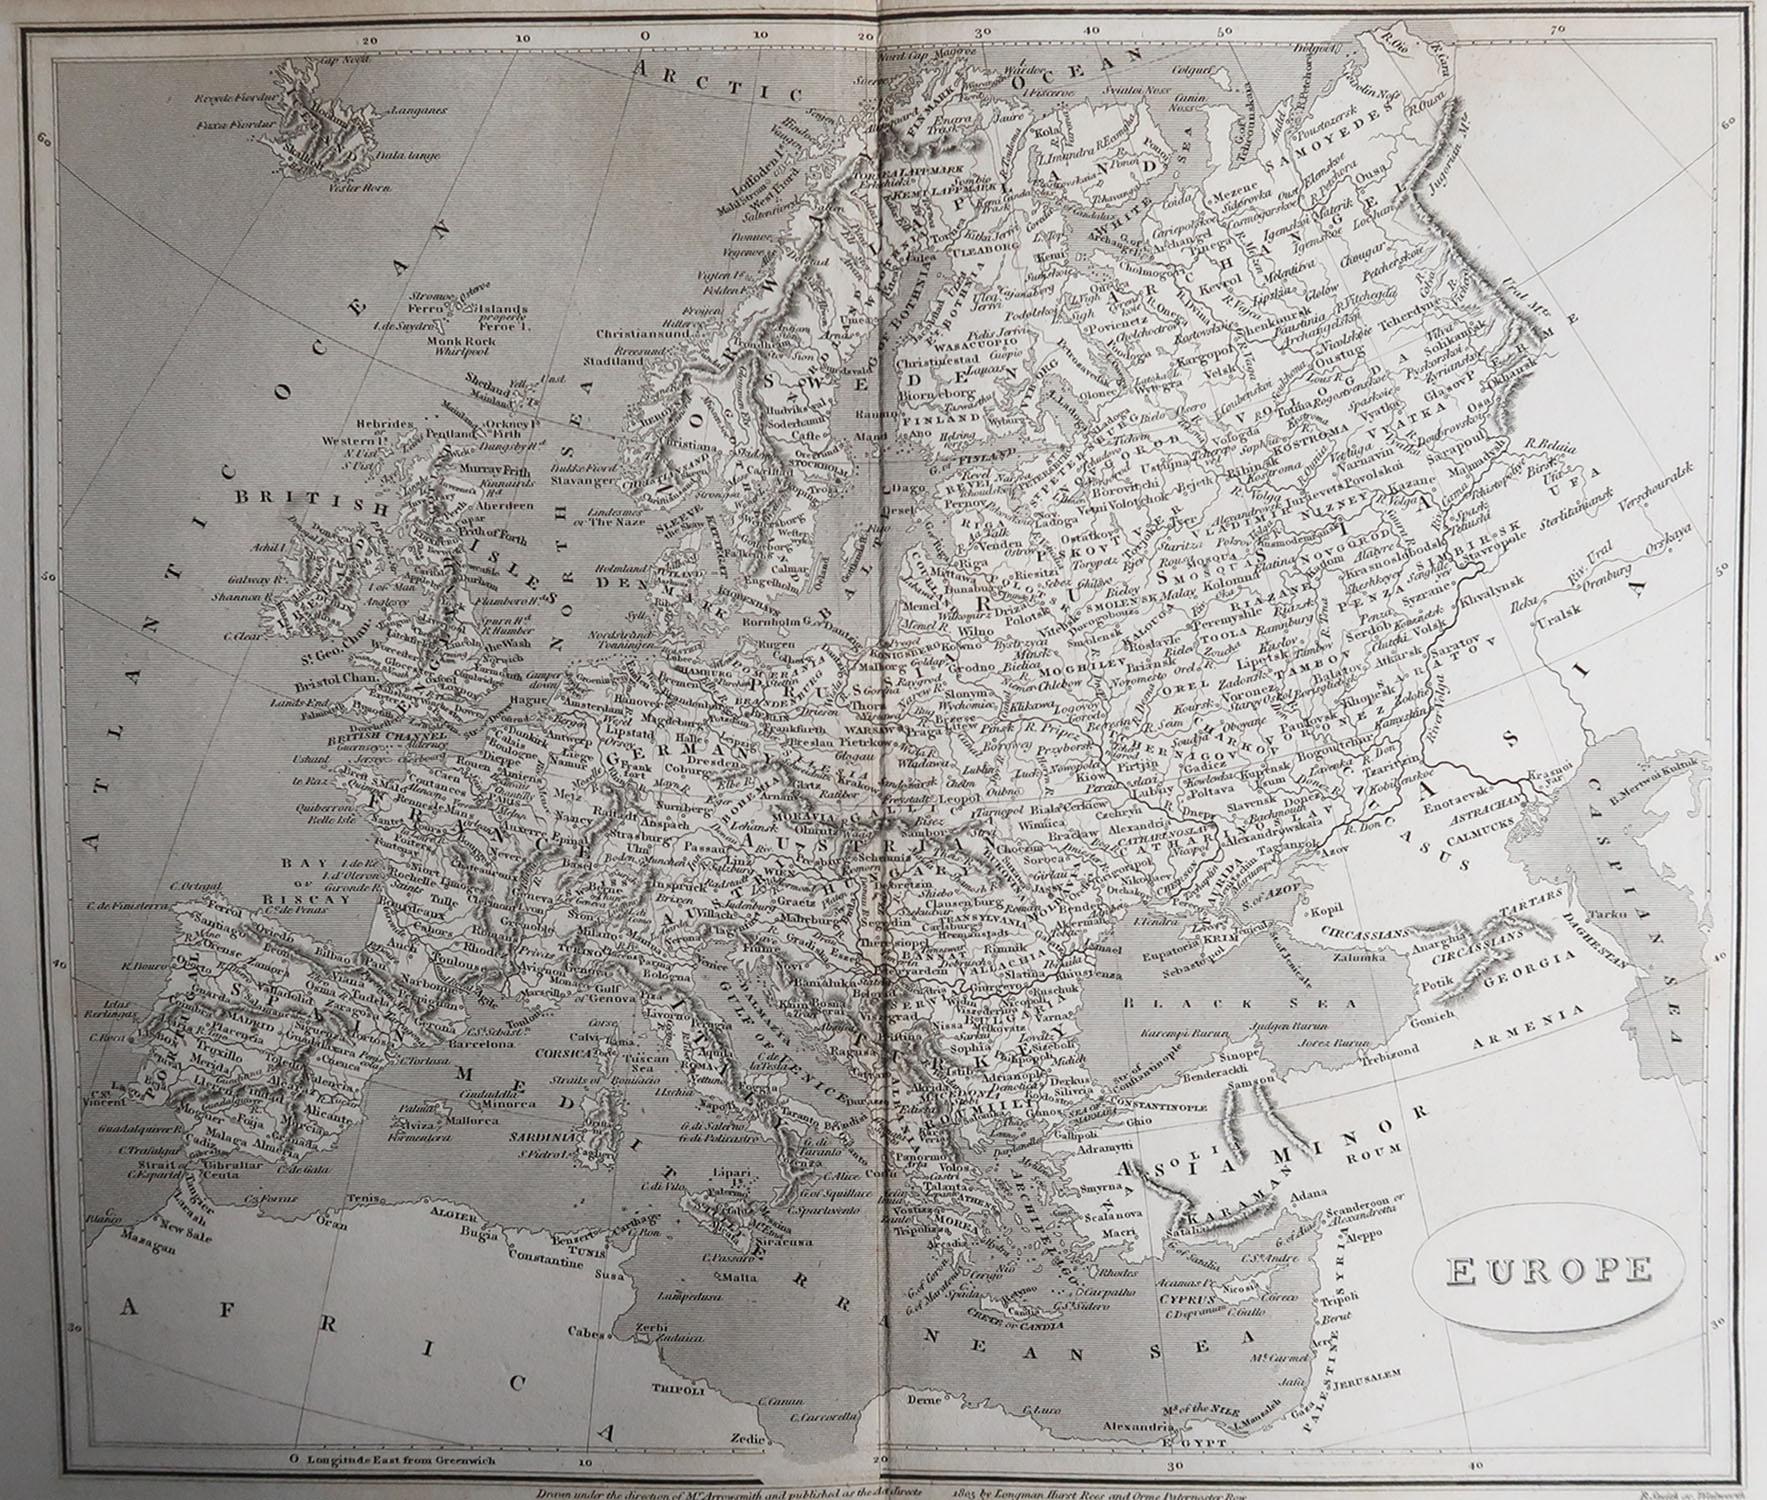 Great map of Europe

Drawn under the direction of Arrowsmith.

Copper-plate engraving.

Published by Longman, Hurst, Rees, Orme and Brown, 1820

Unframed.